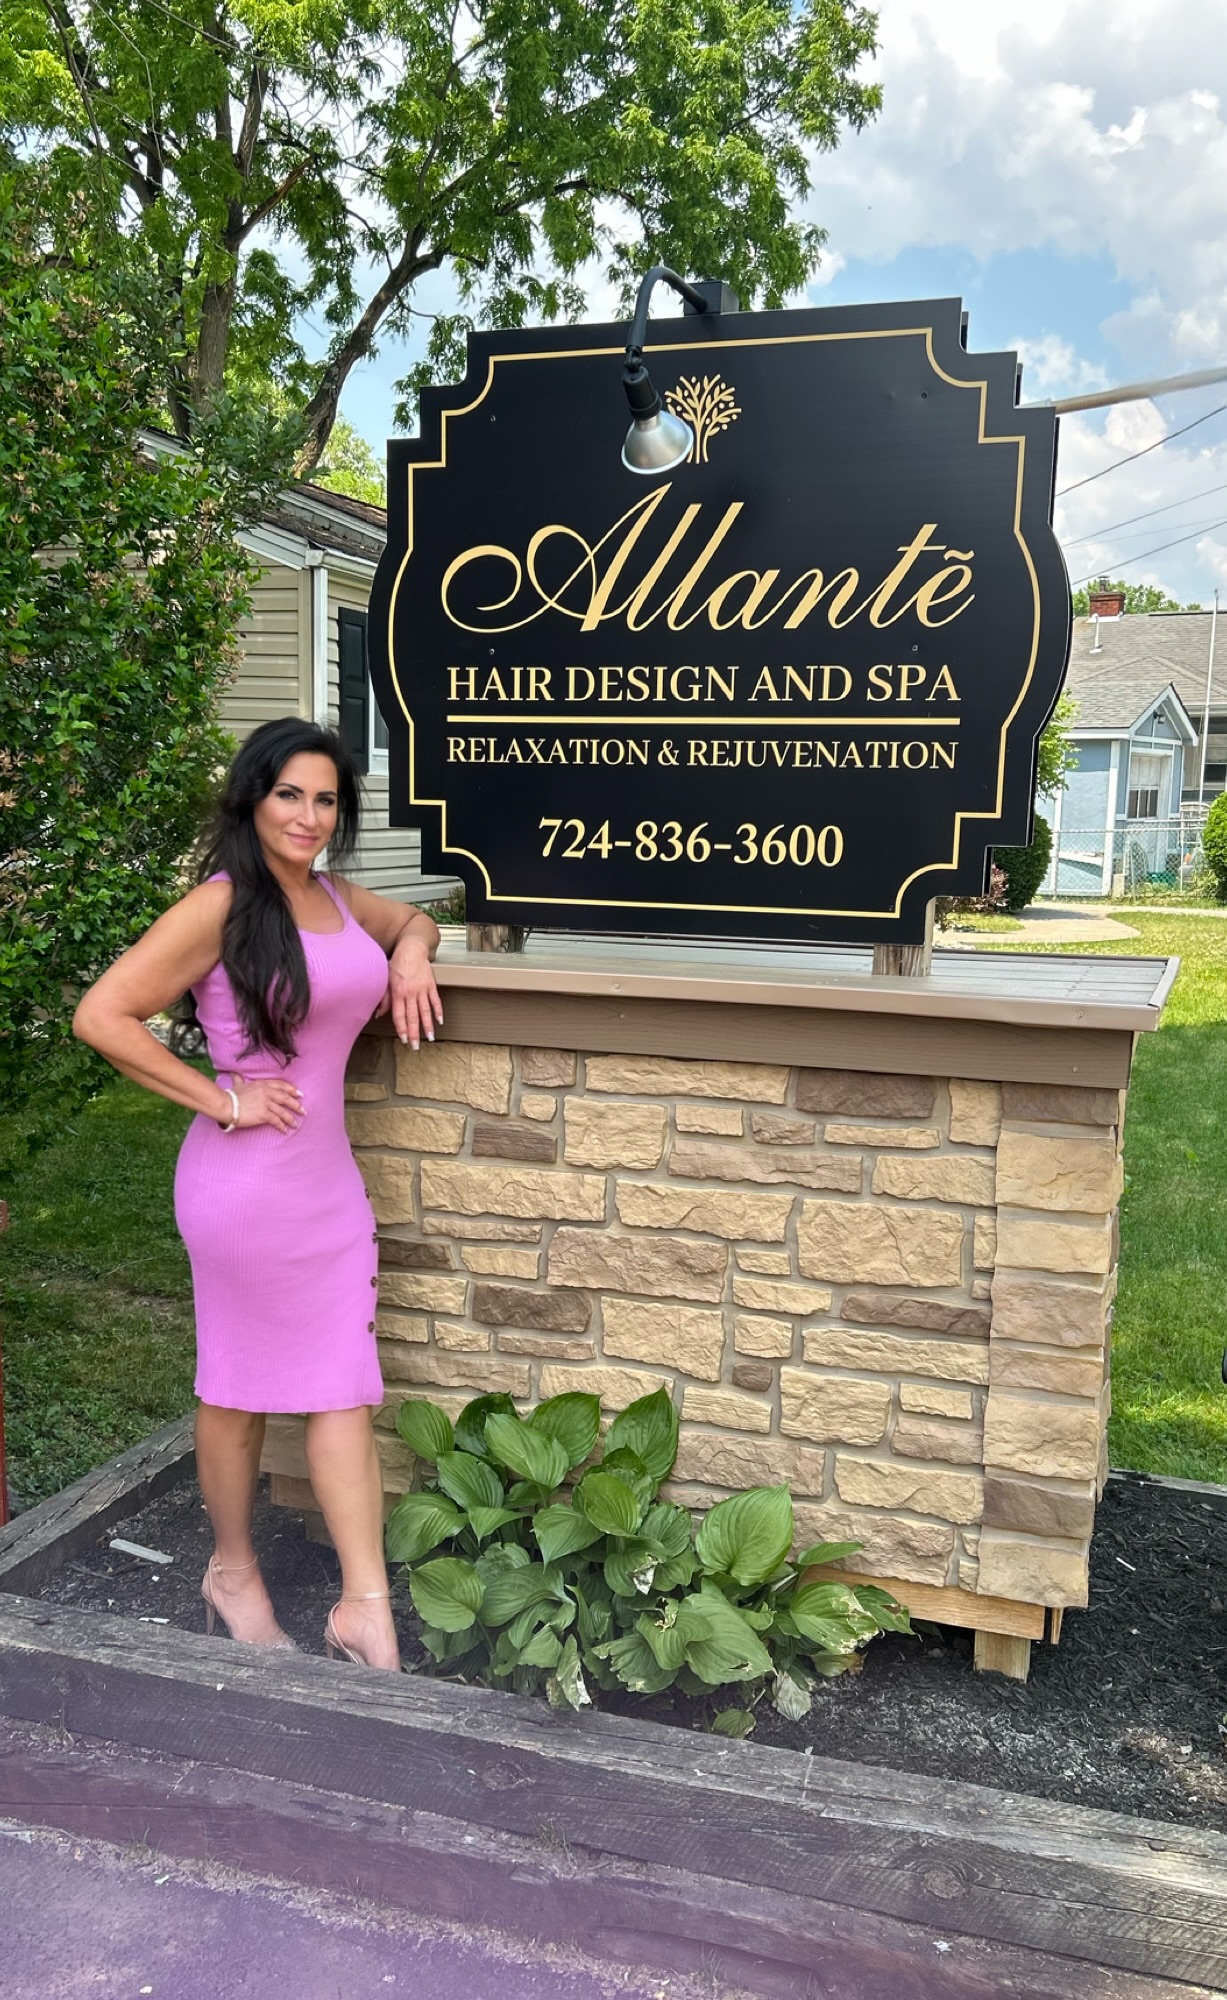 Pedicures and Manicures l Greensburg, PA l Allantè Hair Design and Spa